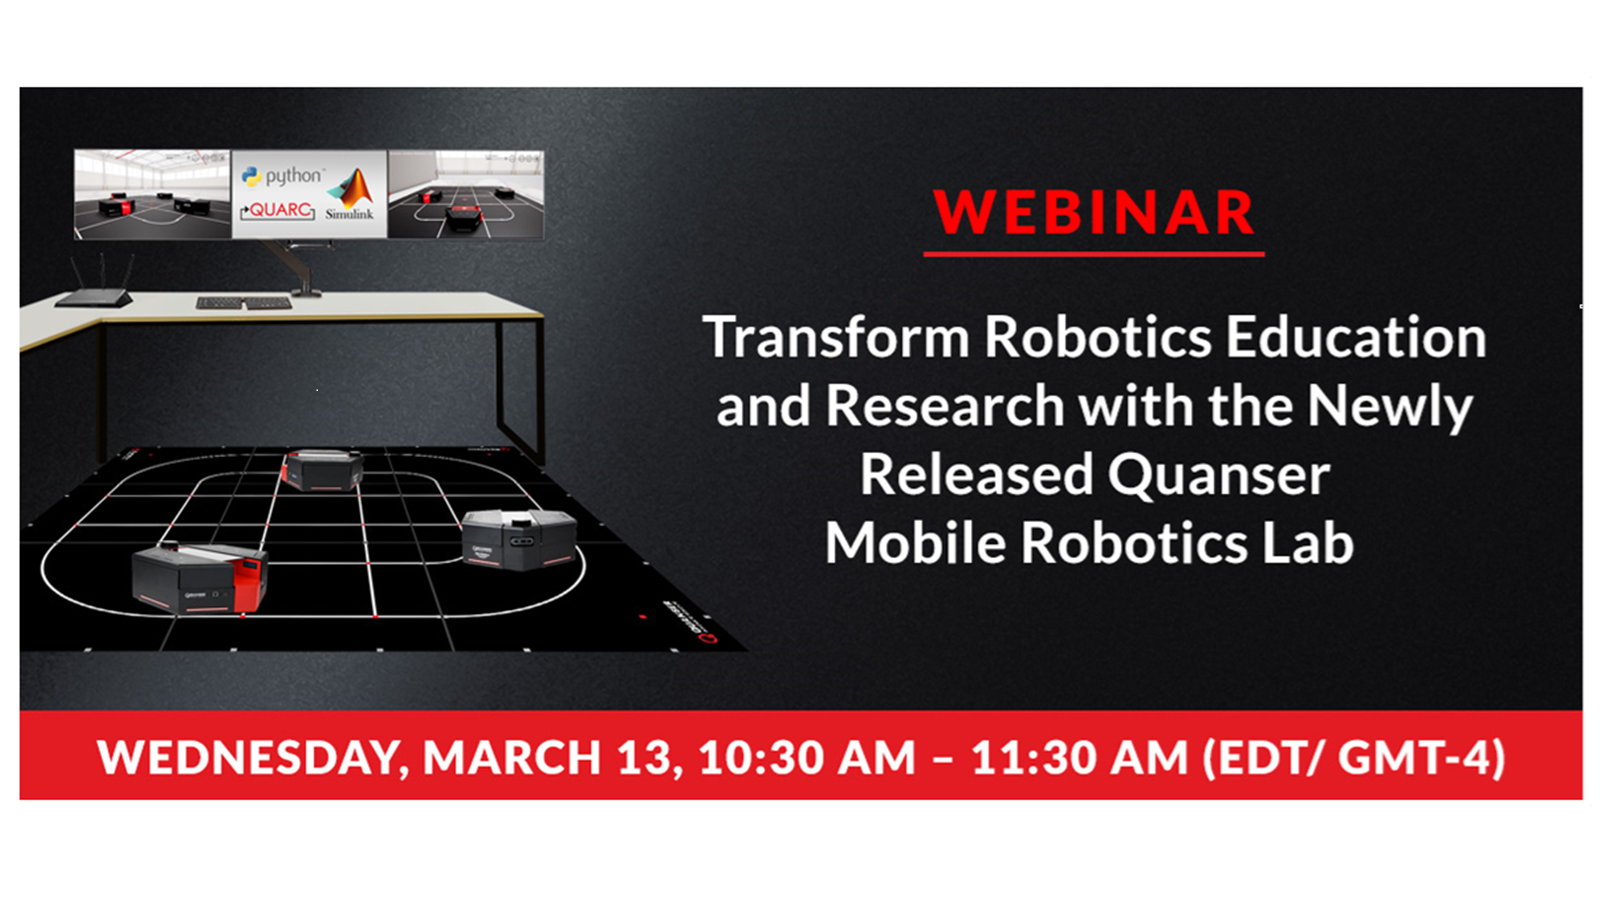 Webinar:TRANSFORM ROBOTICS EDUCATION AND RESEARCH WITH THE NEWLY RELEASED QUANSER MOBILE ROBOTICS LABのサムネイル